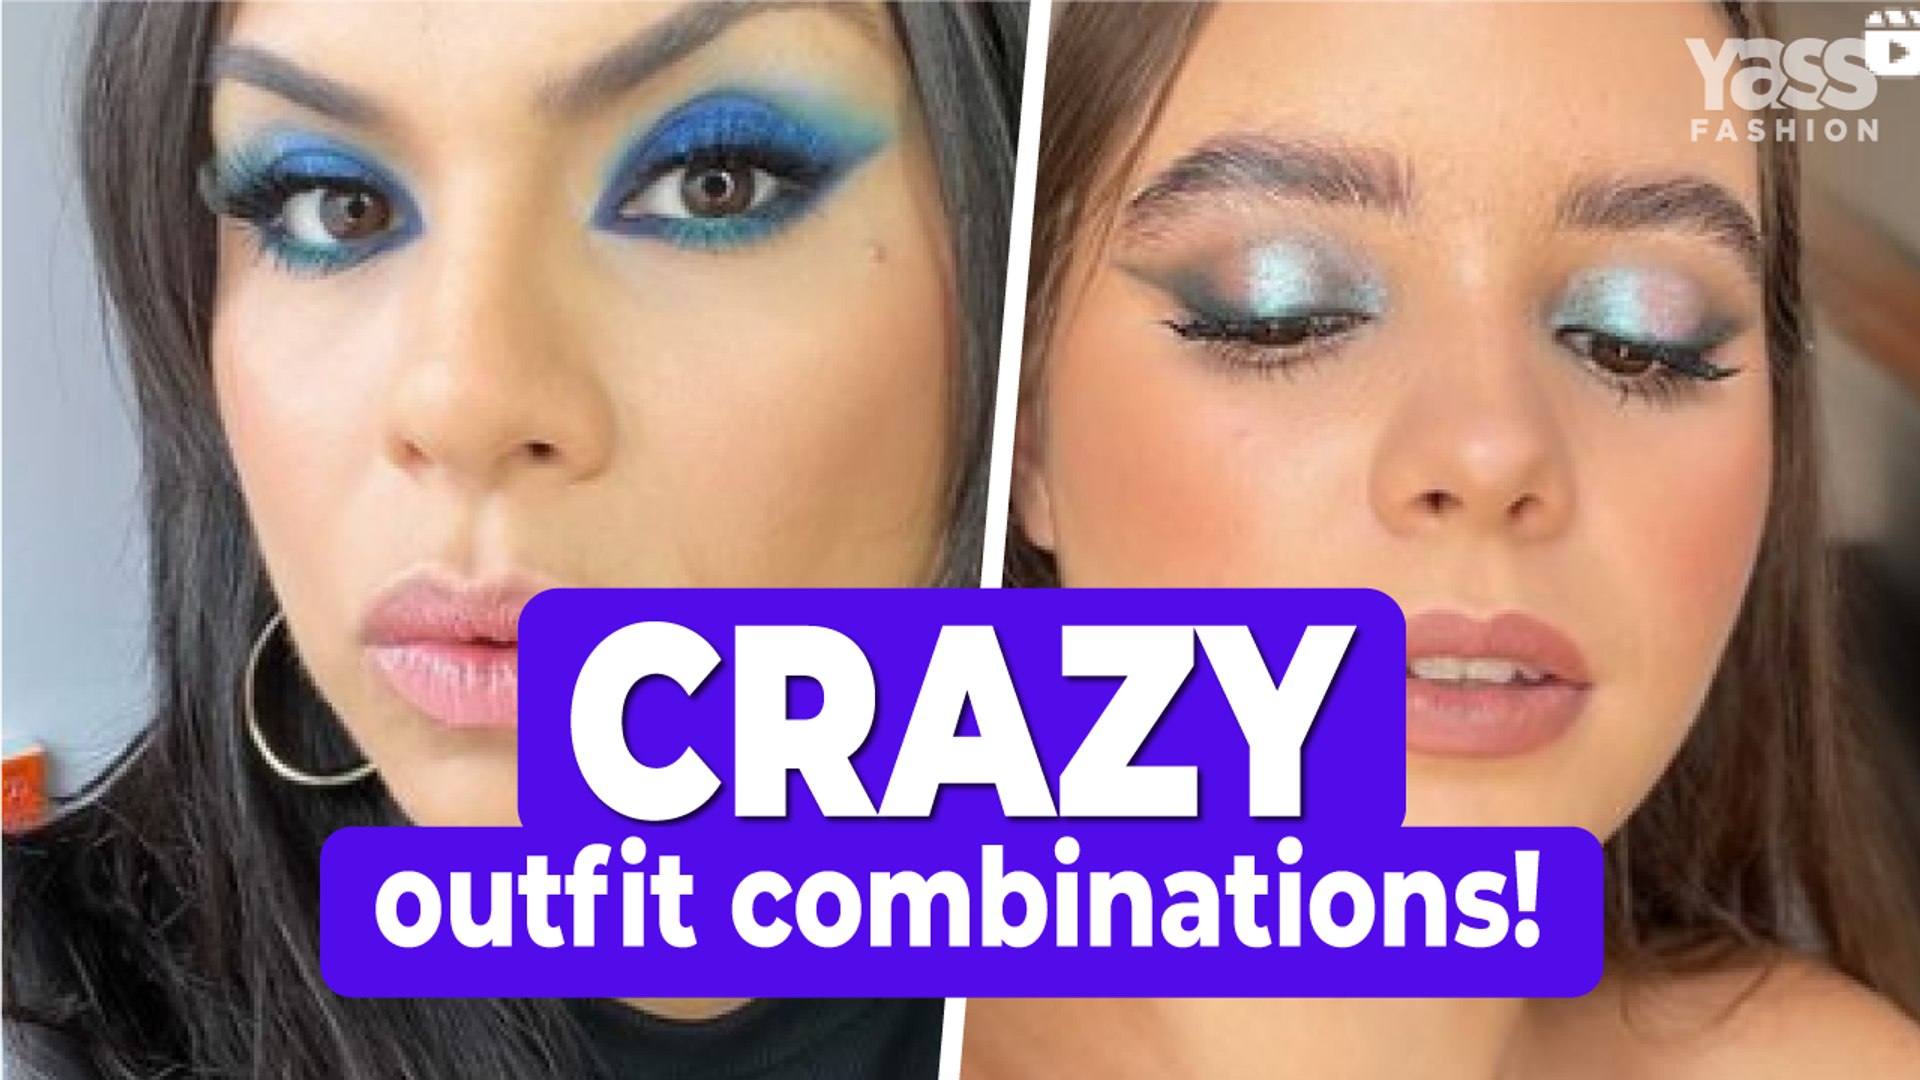 Crazy outfit combinations!